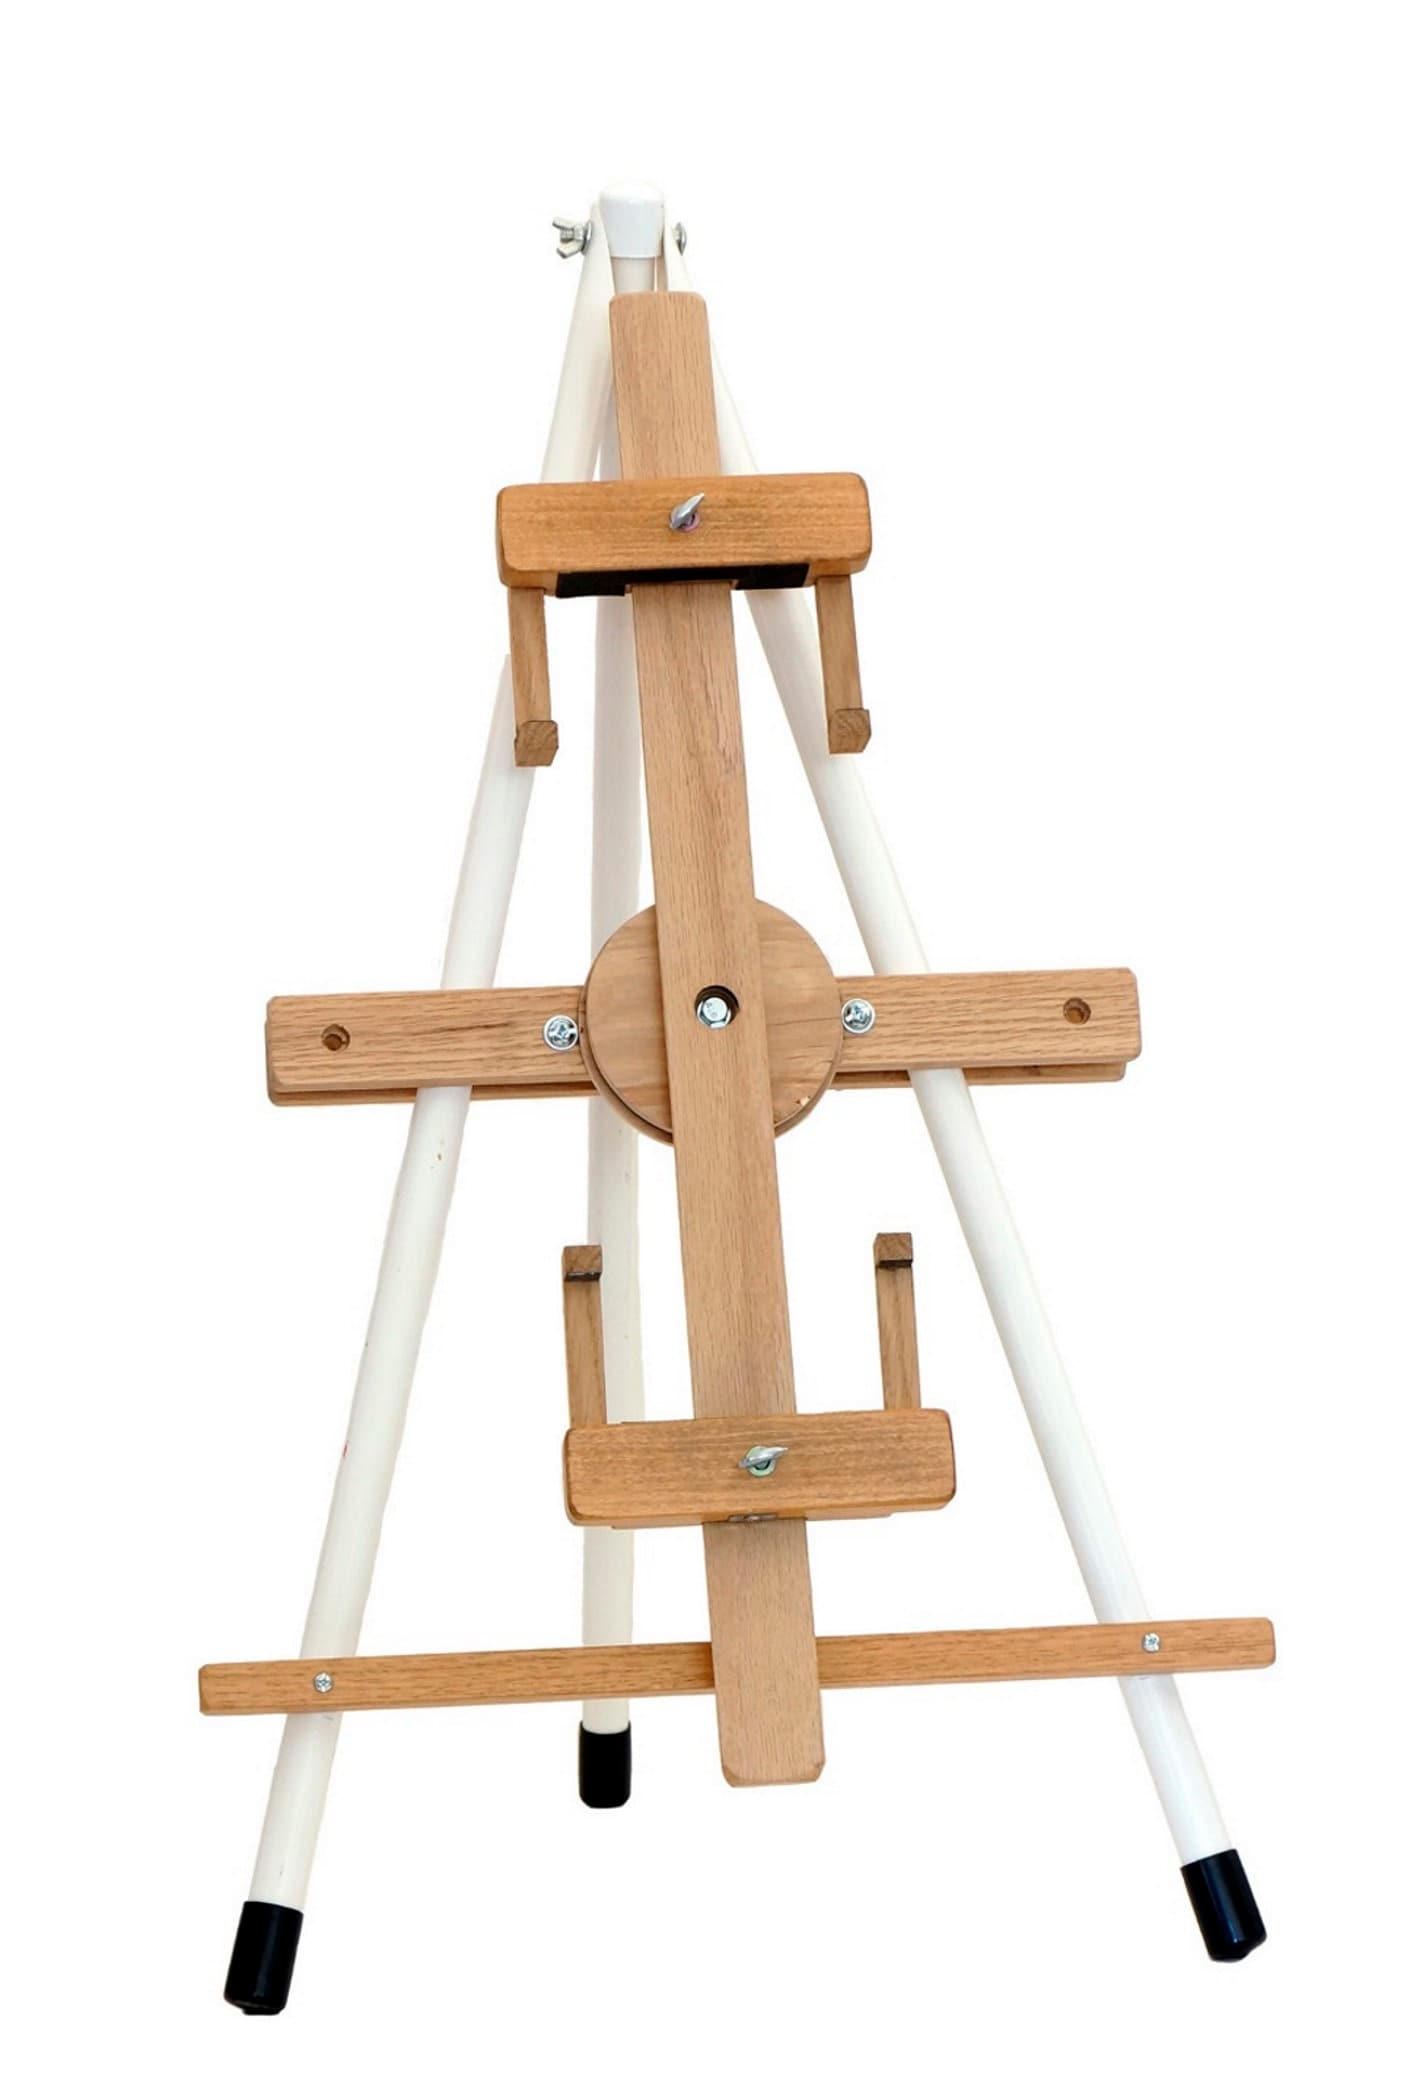 Arts & Crafts Easels  Buy Arts & Crafts Easels Online in Nigeria